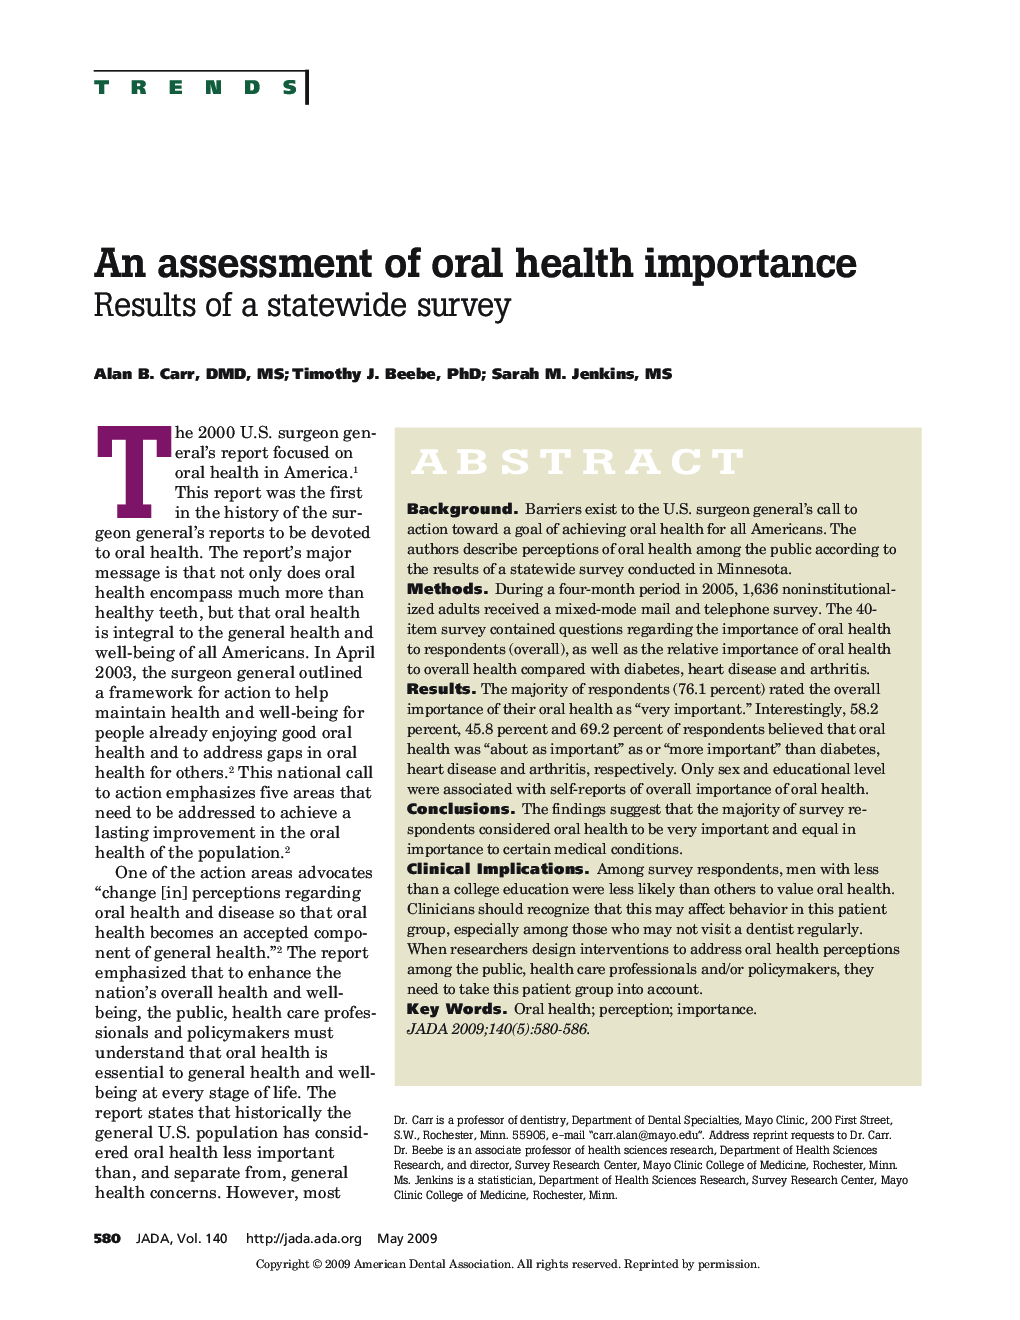 An Assessment of Oral Health Importance : Results of a Statewide Survey